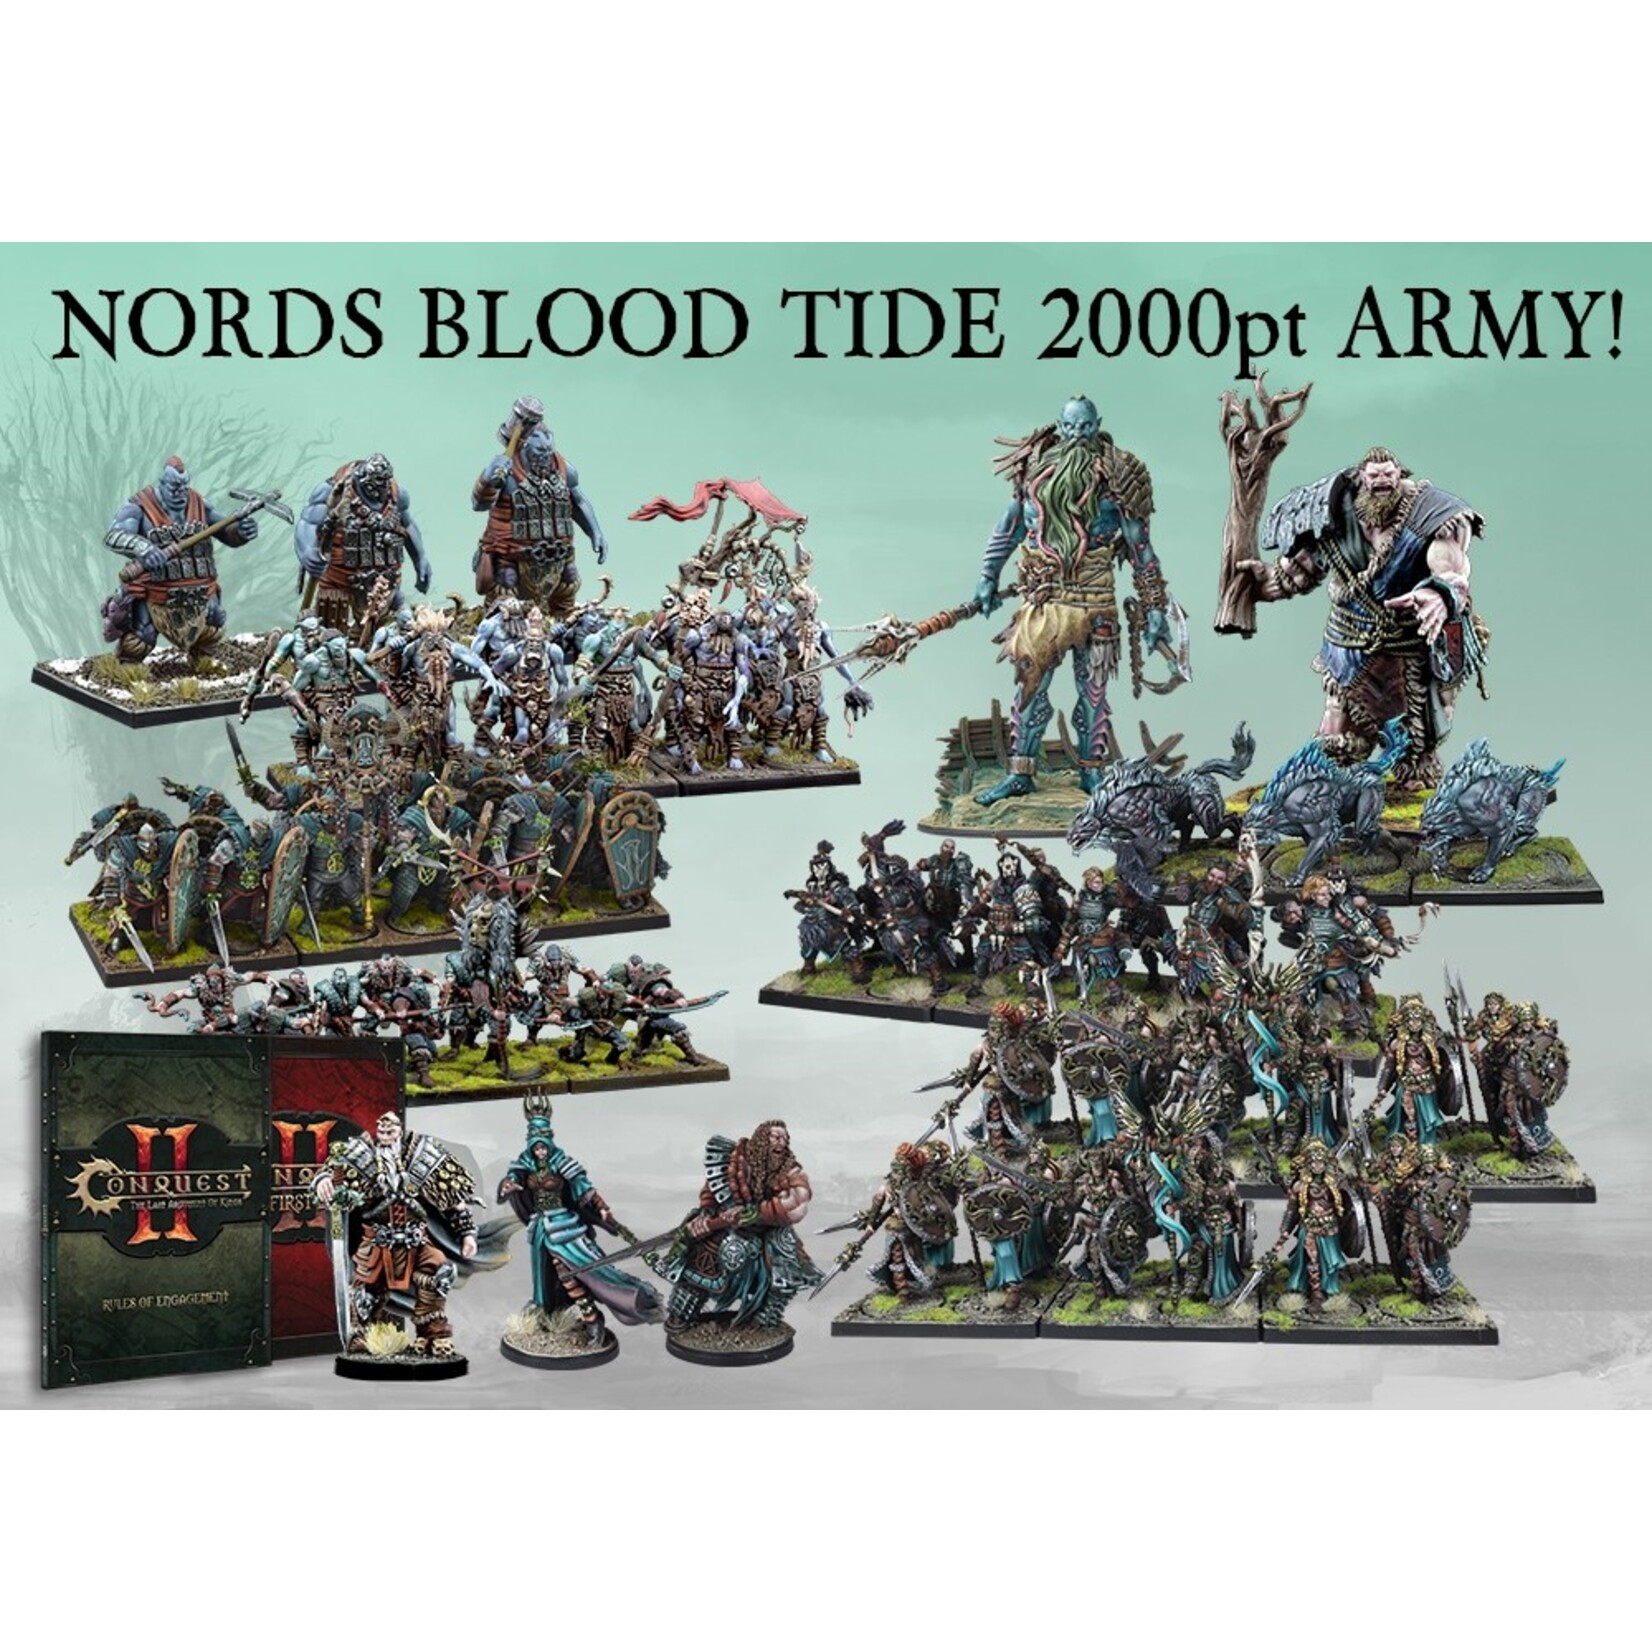 Conquest Blood Tide 2000pt Army - Nords